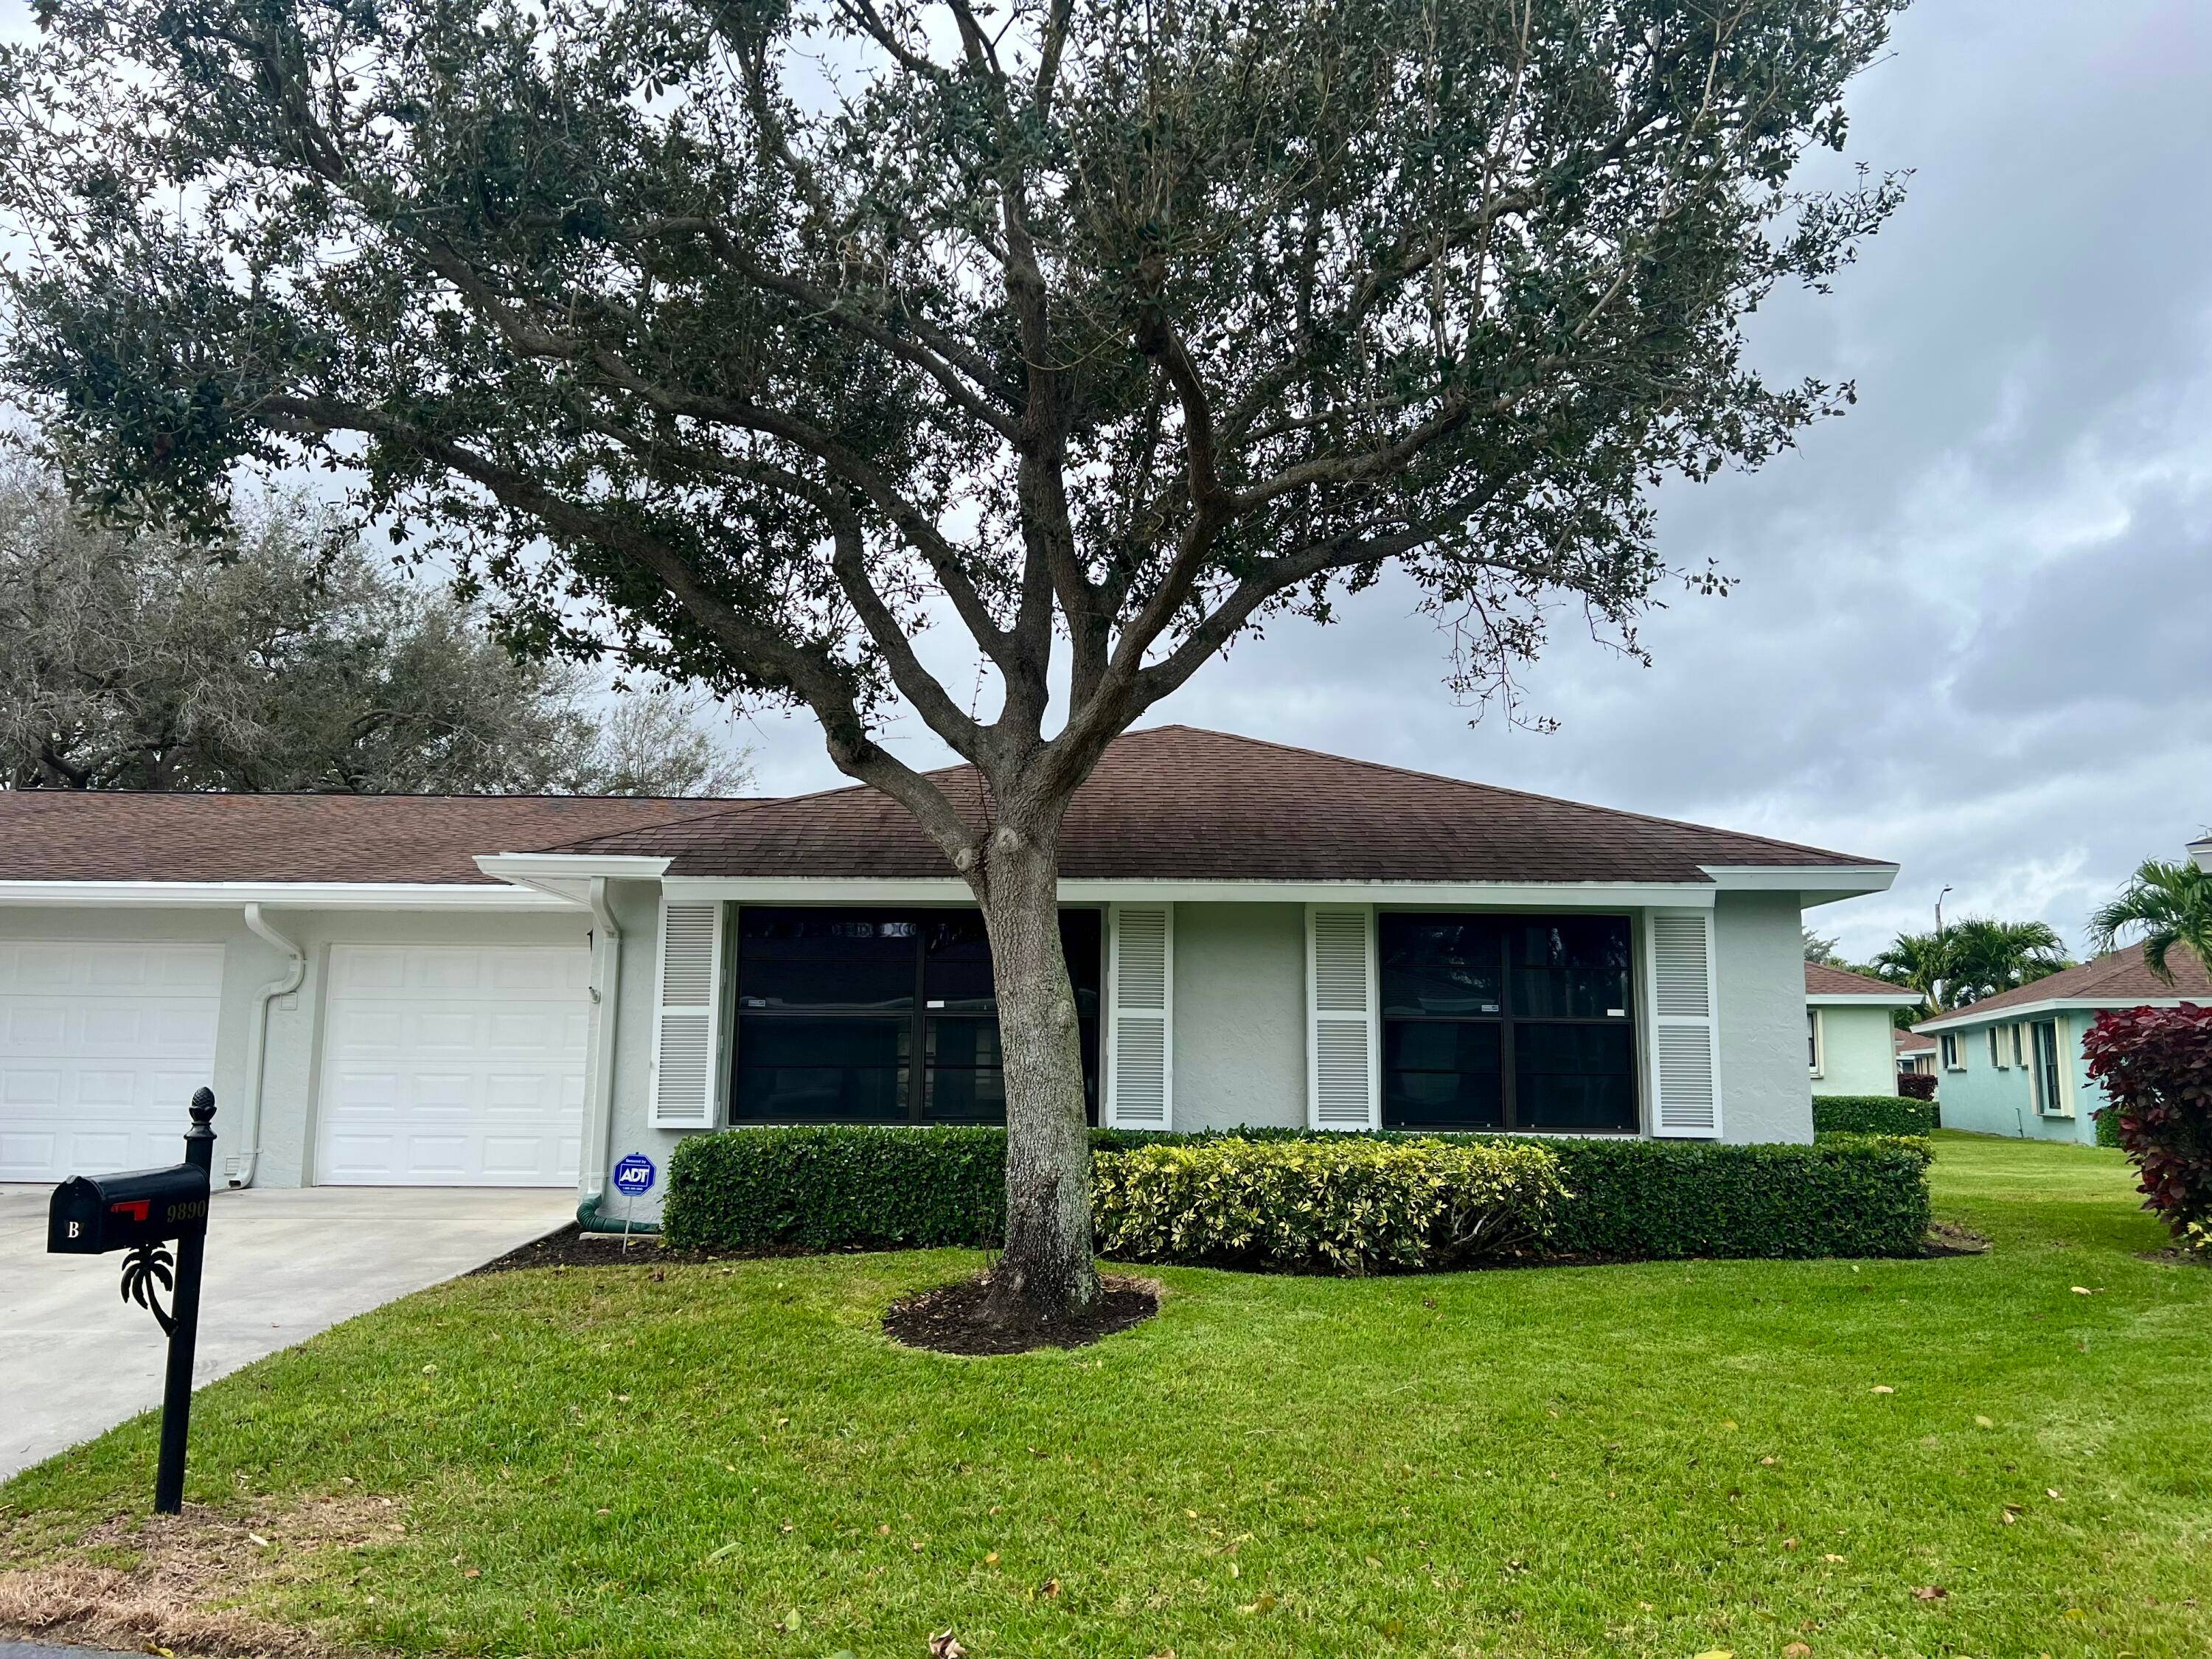 WELCOME HOME ! This RENOVATED 2 bed, 2 bath, 1 car garage villa in the desirable 55 Community Bent Tree Villas East has everything you have been looking for !